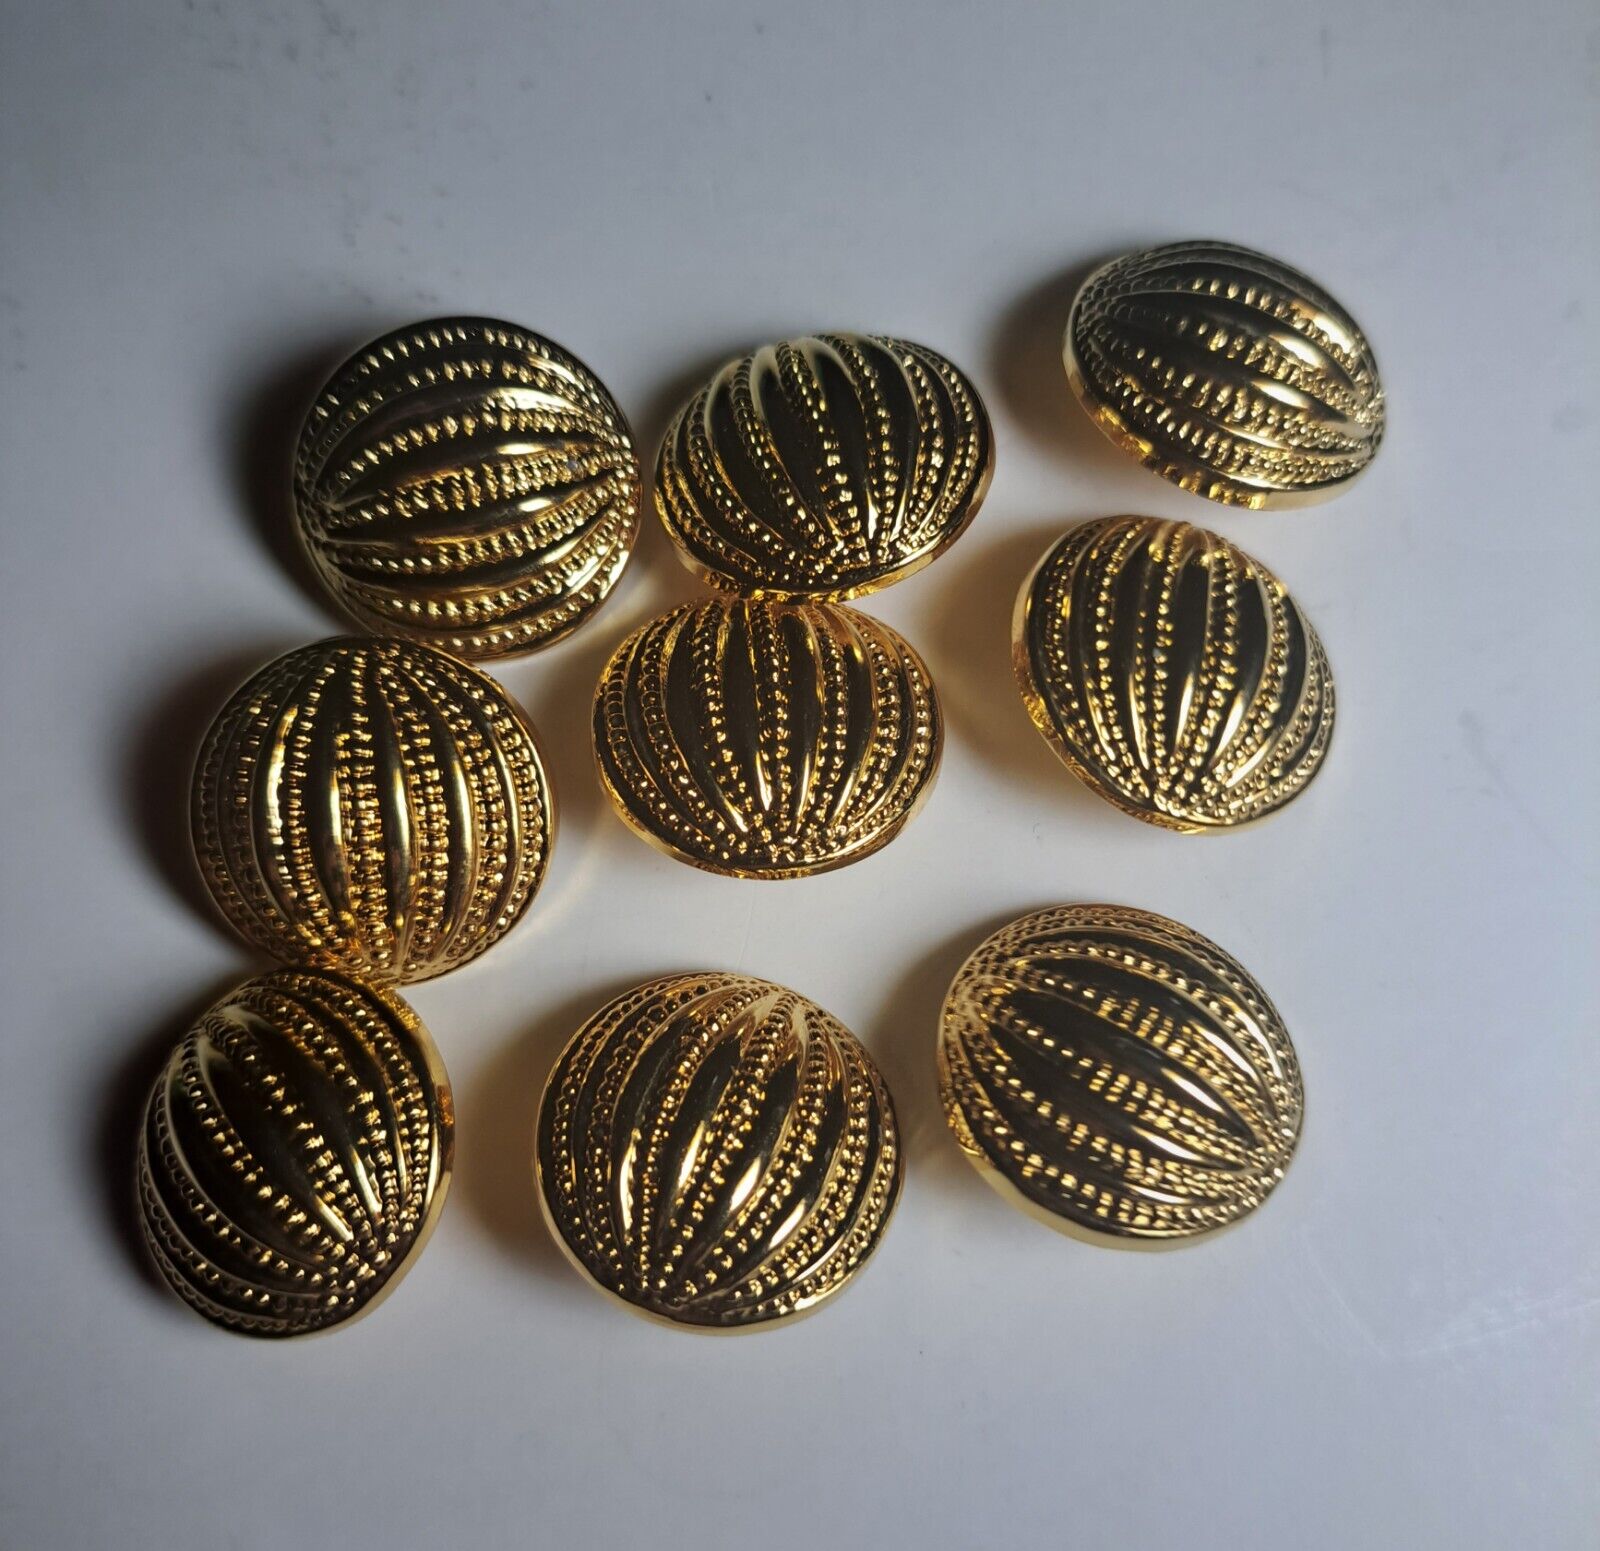 9 VTG Gold Tone Embossed Buttons Rounded Plastic Fashion Statement Piece Buttons